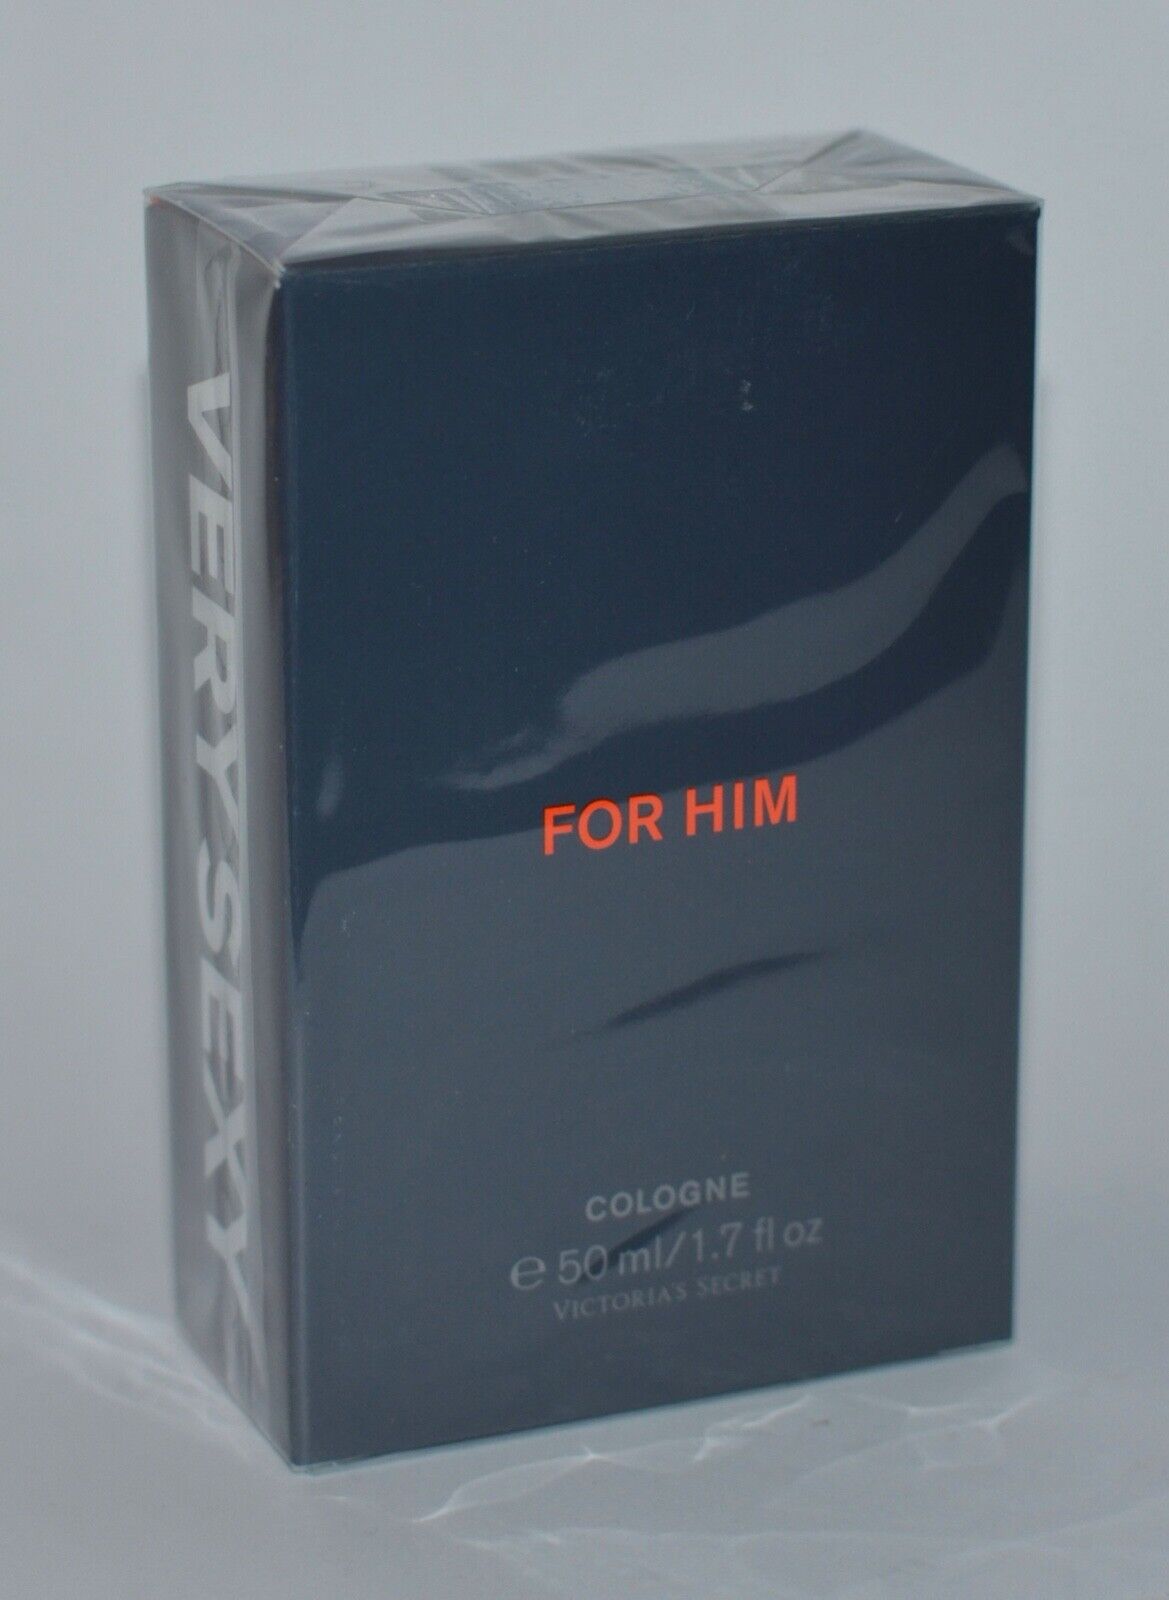 NEW VICTORIAapos;S SECRET VERY SEXY Cheap mail order sales FOR COLOGNE MEN MIST Al sold out. HIM BO